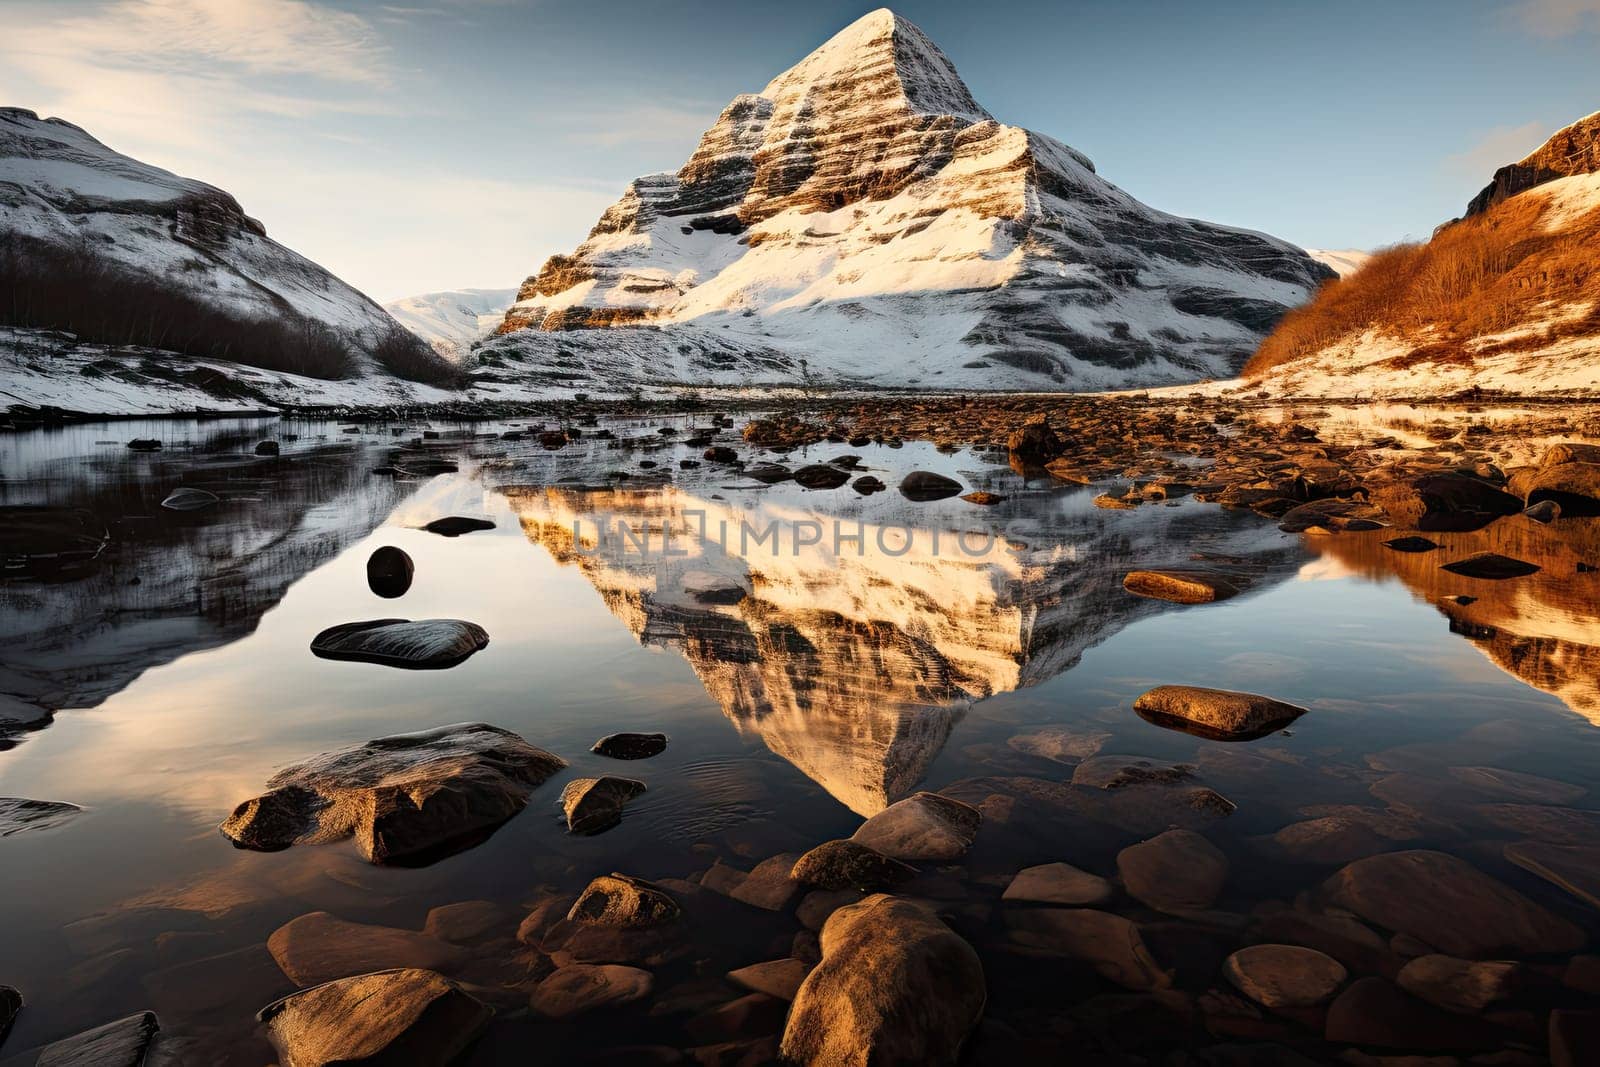 A Majestic Reflection: The Serene Mountain Mirrored in the Tranquil Lake